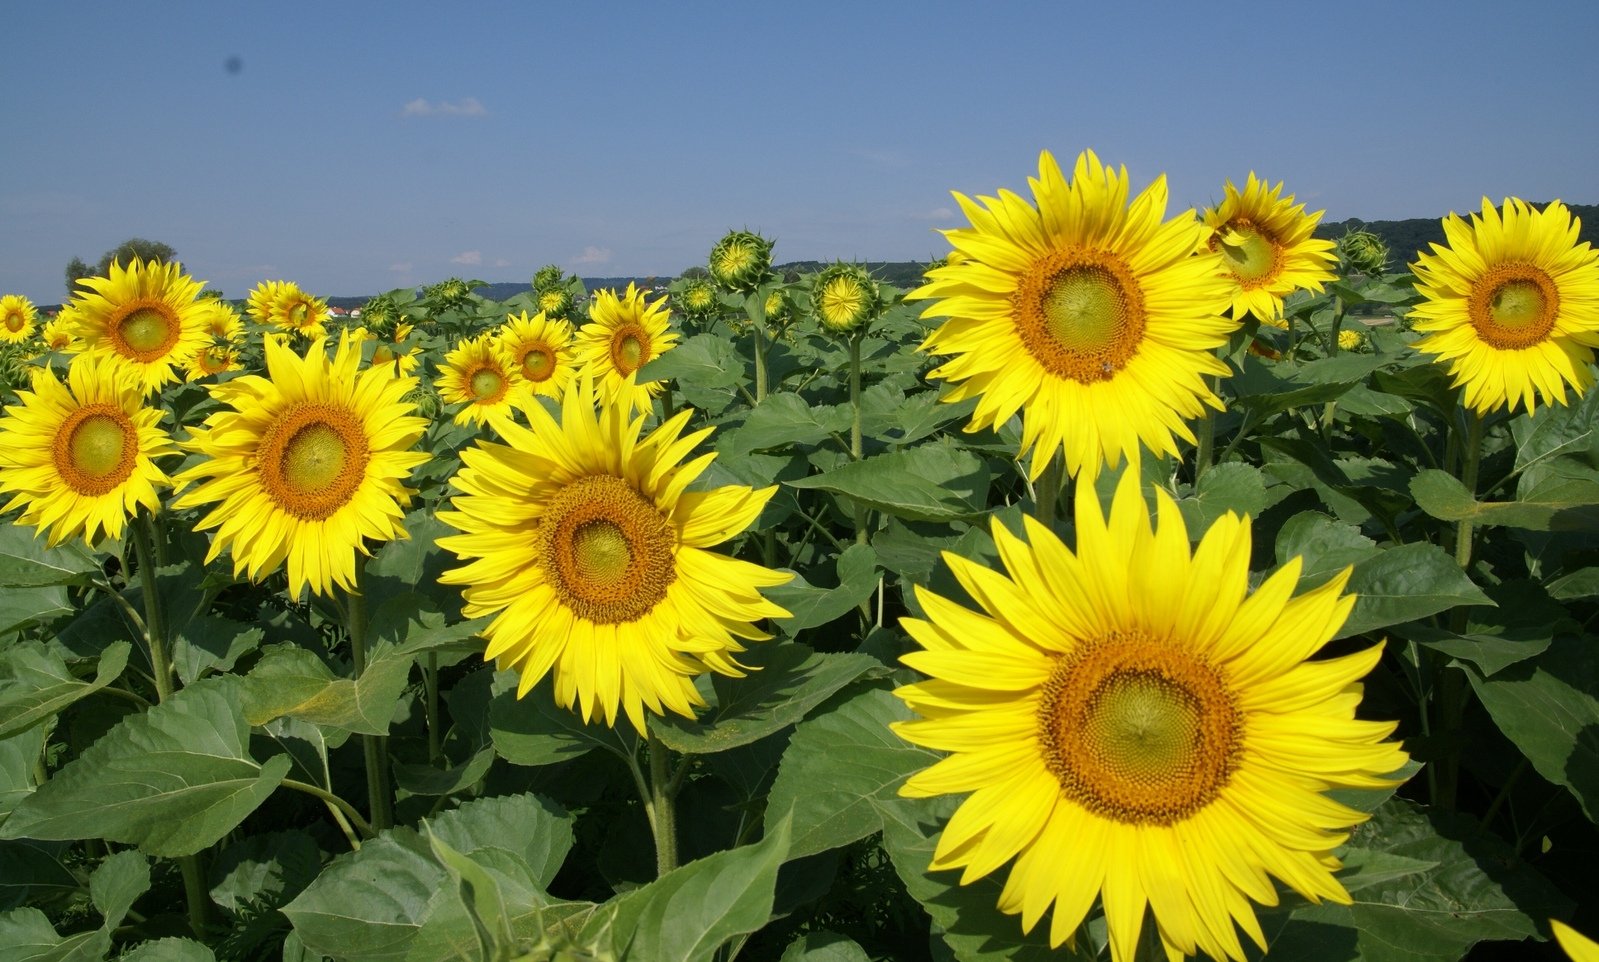 a field full of yellow sunflowers is pictured in this image